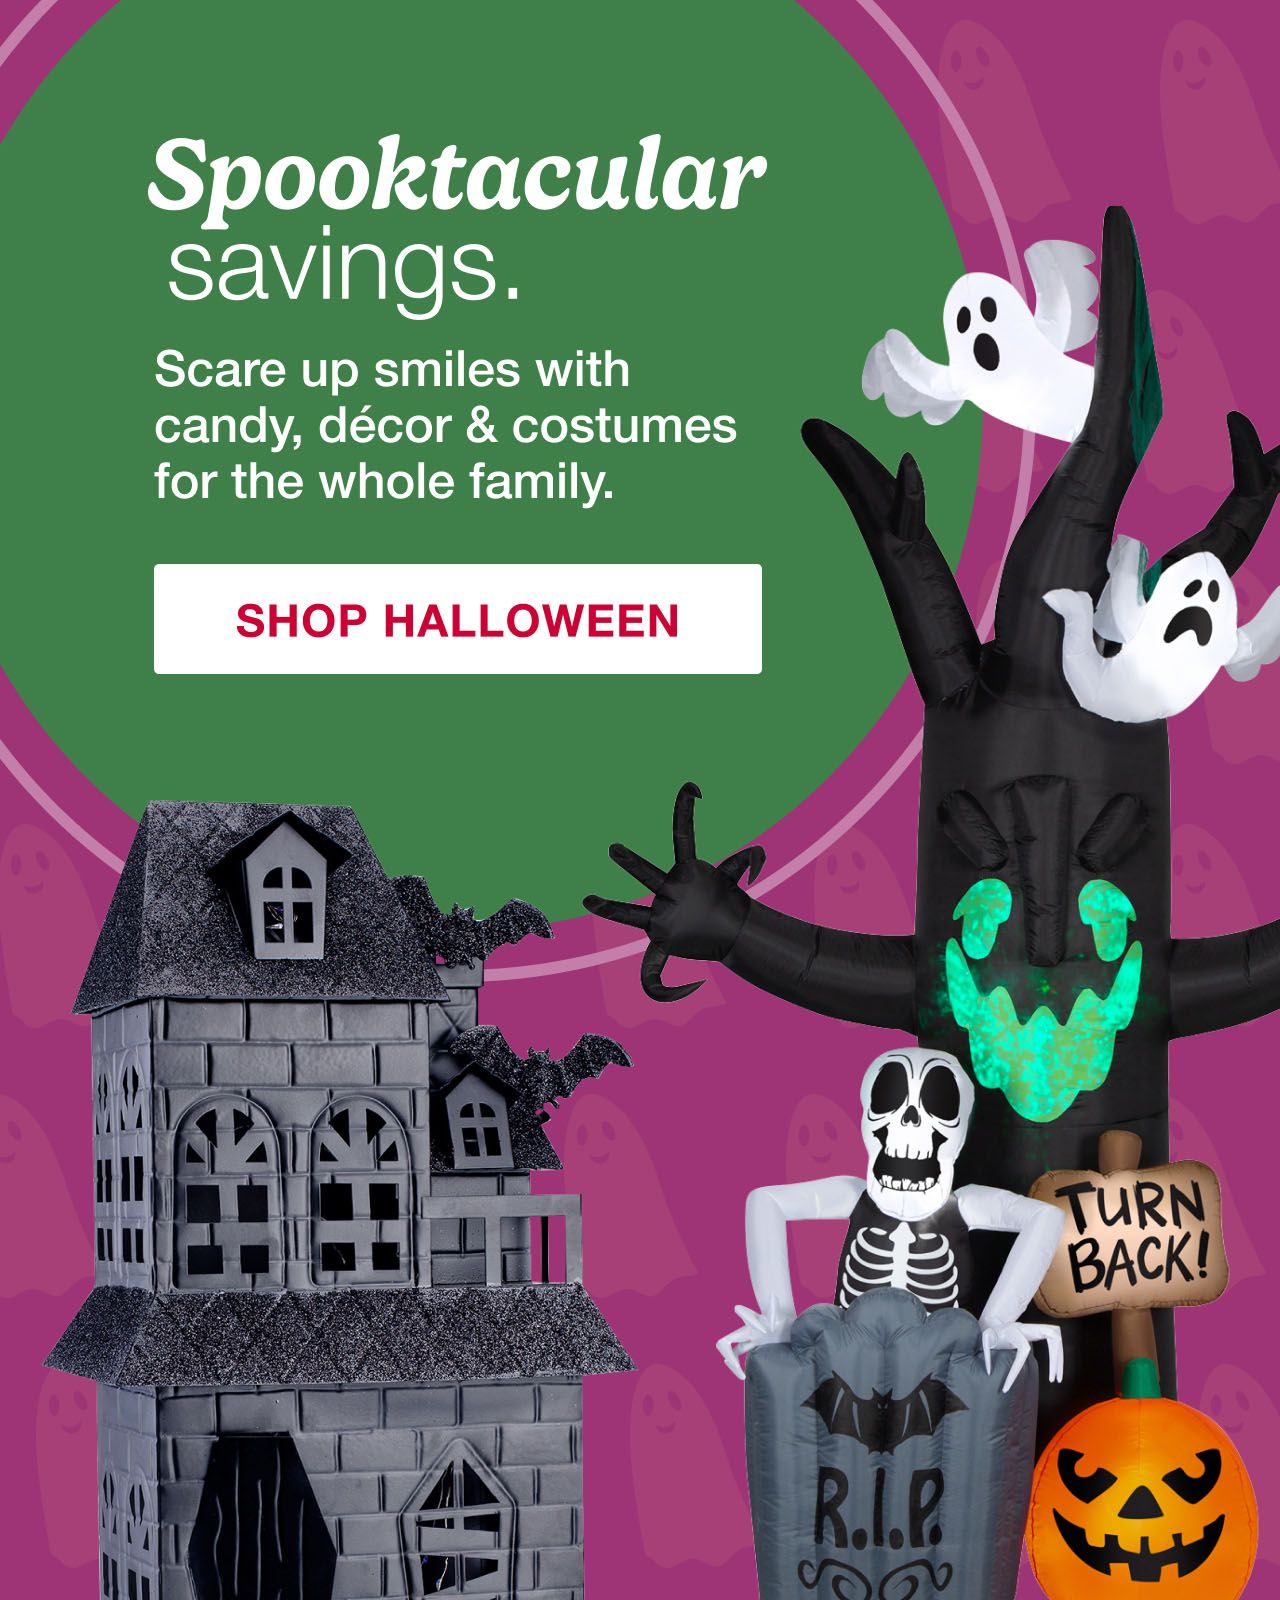 Spooktacular savings. Scare up smiles with candy, decor and costumes for the whole family. Click to shop Halloween.